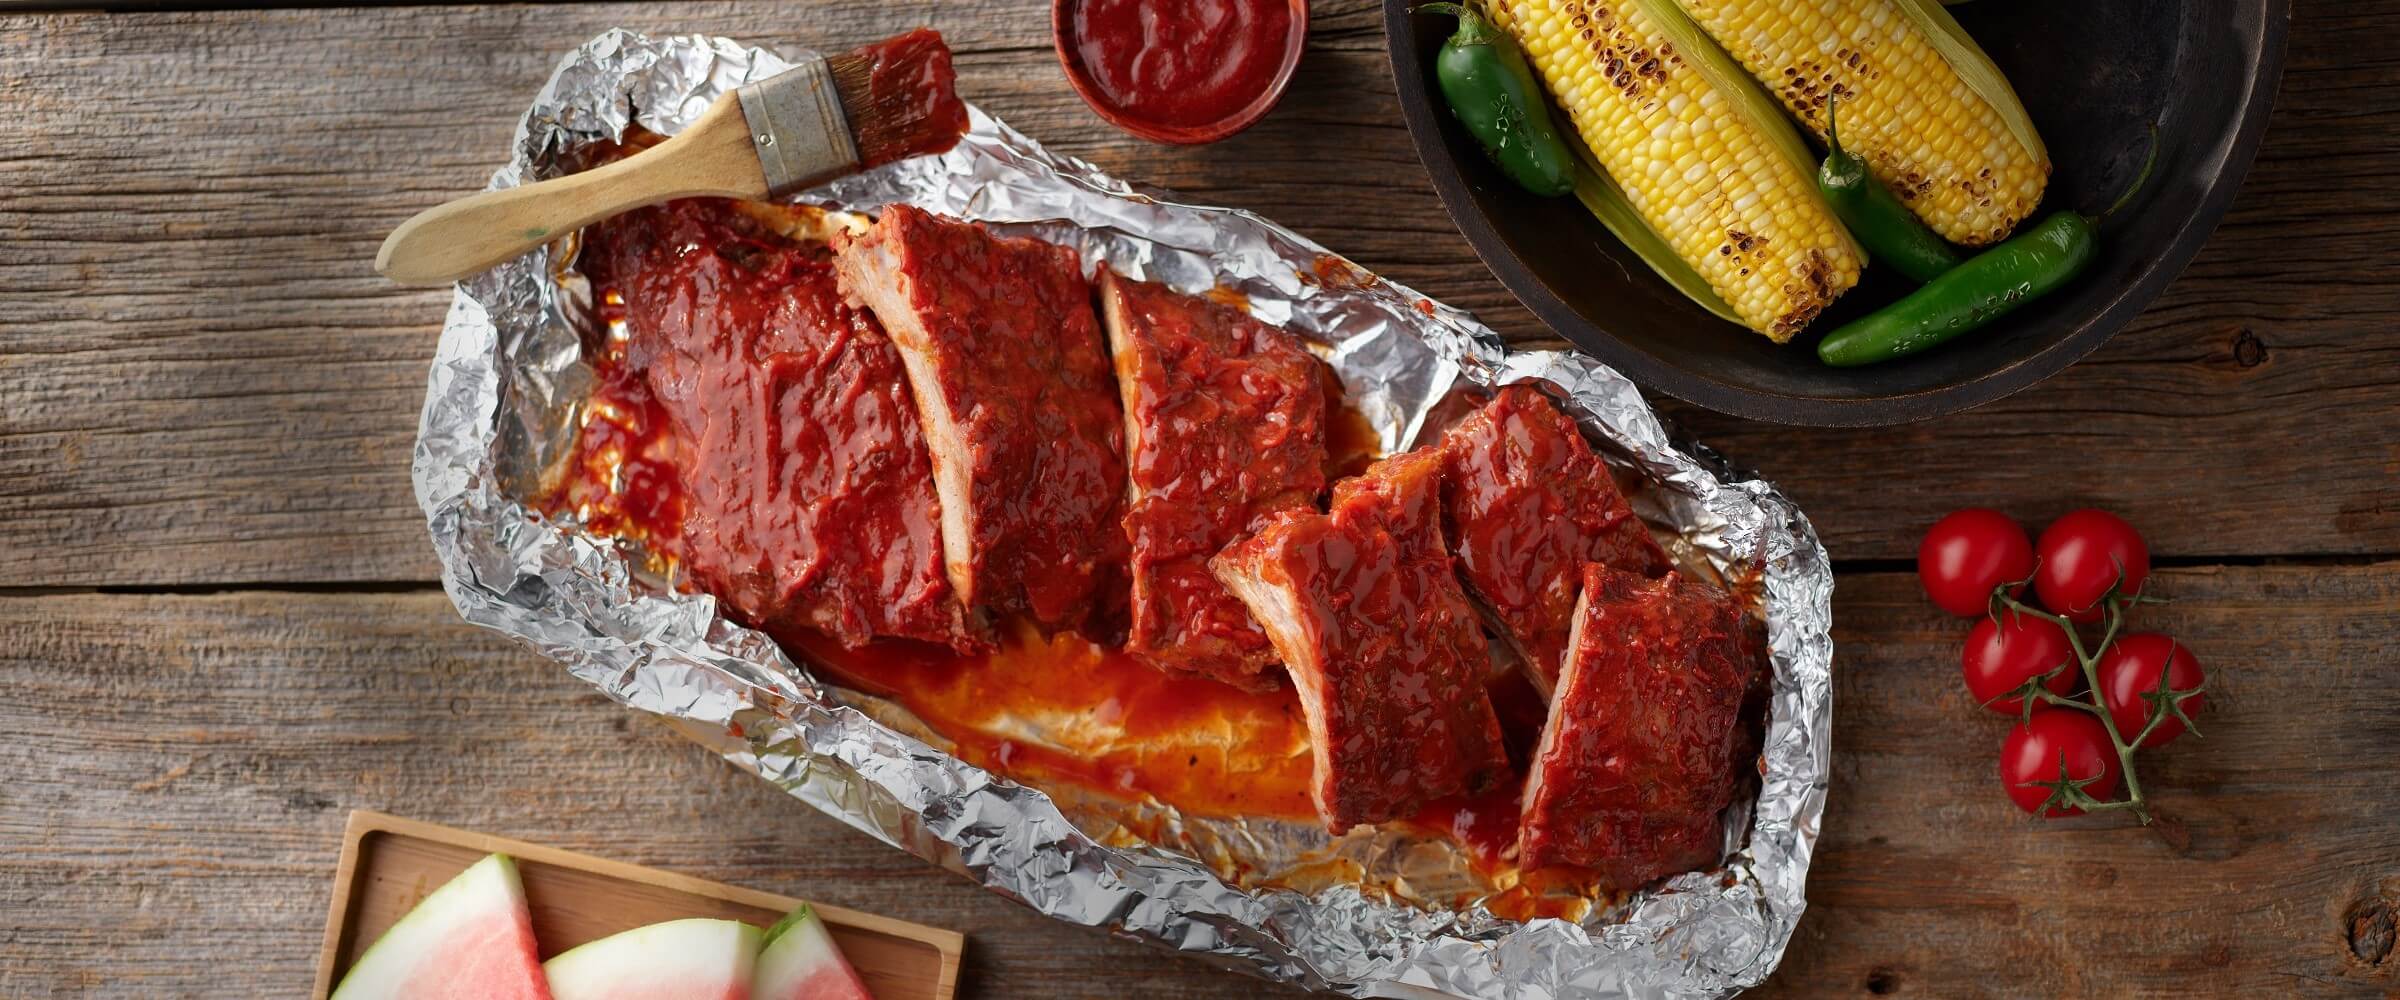 BBQ grilled babyback ribs in foil with extra sauce and sweet corn